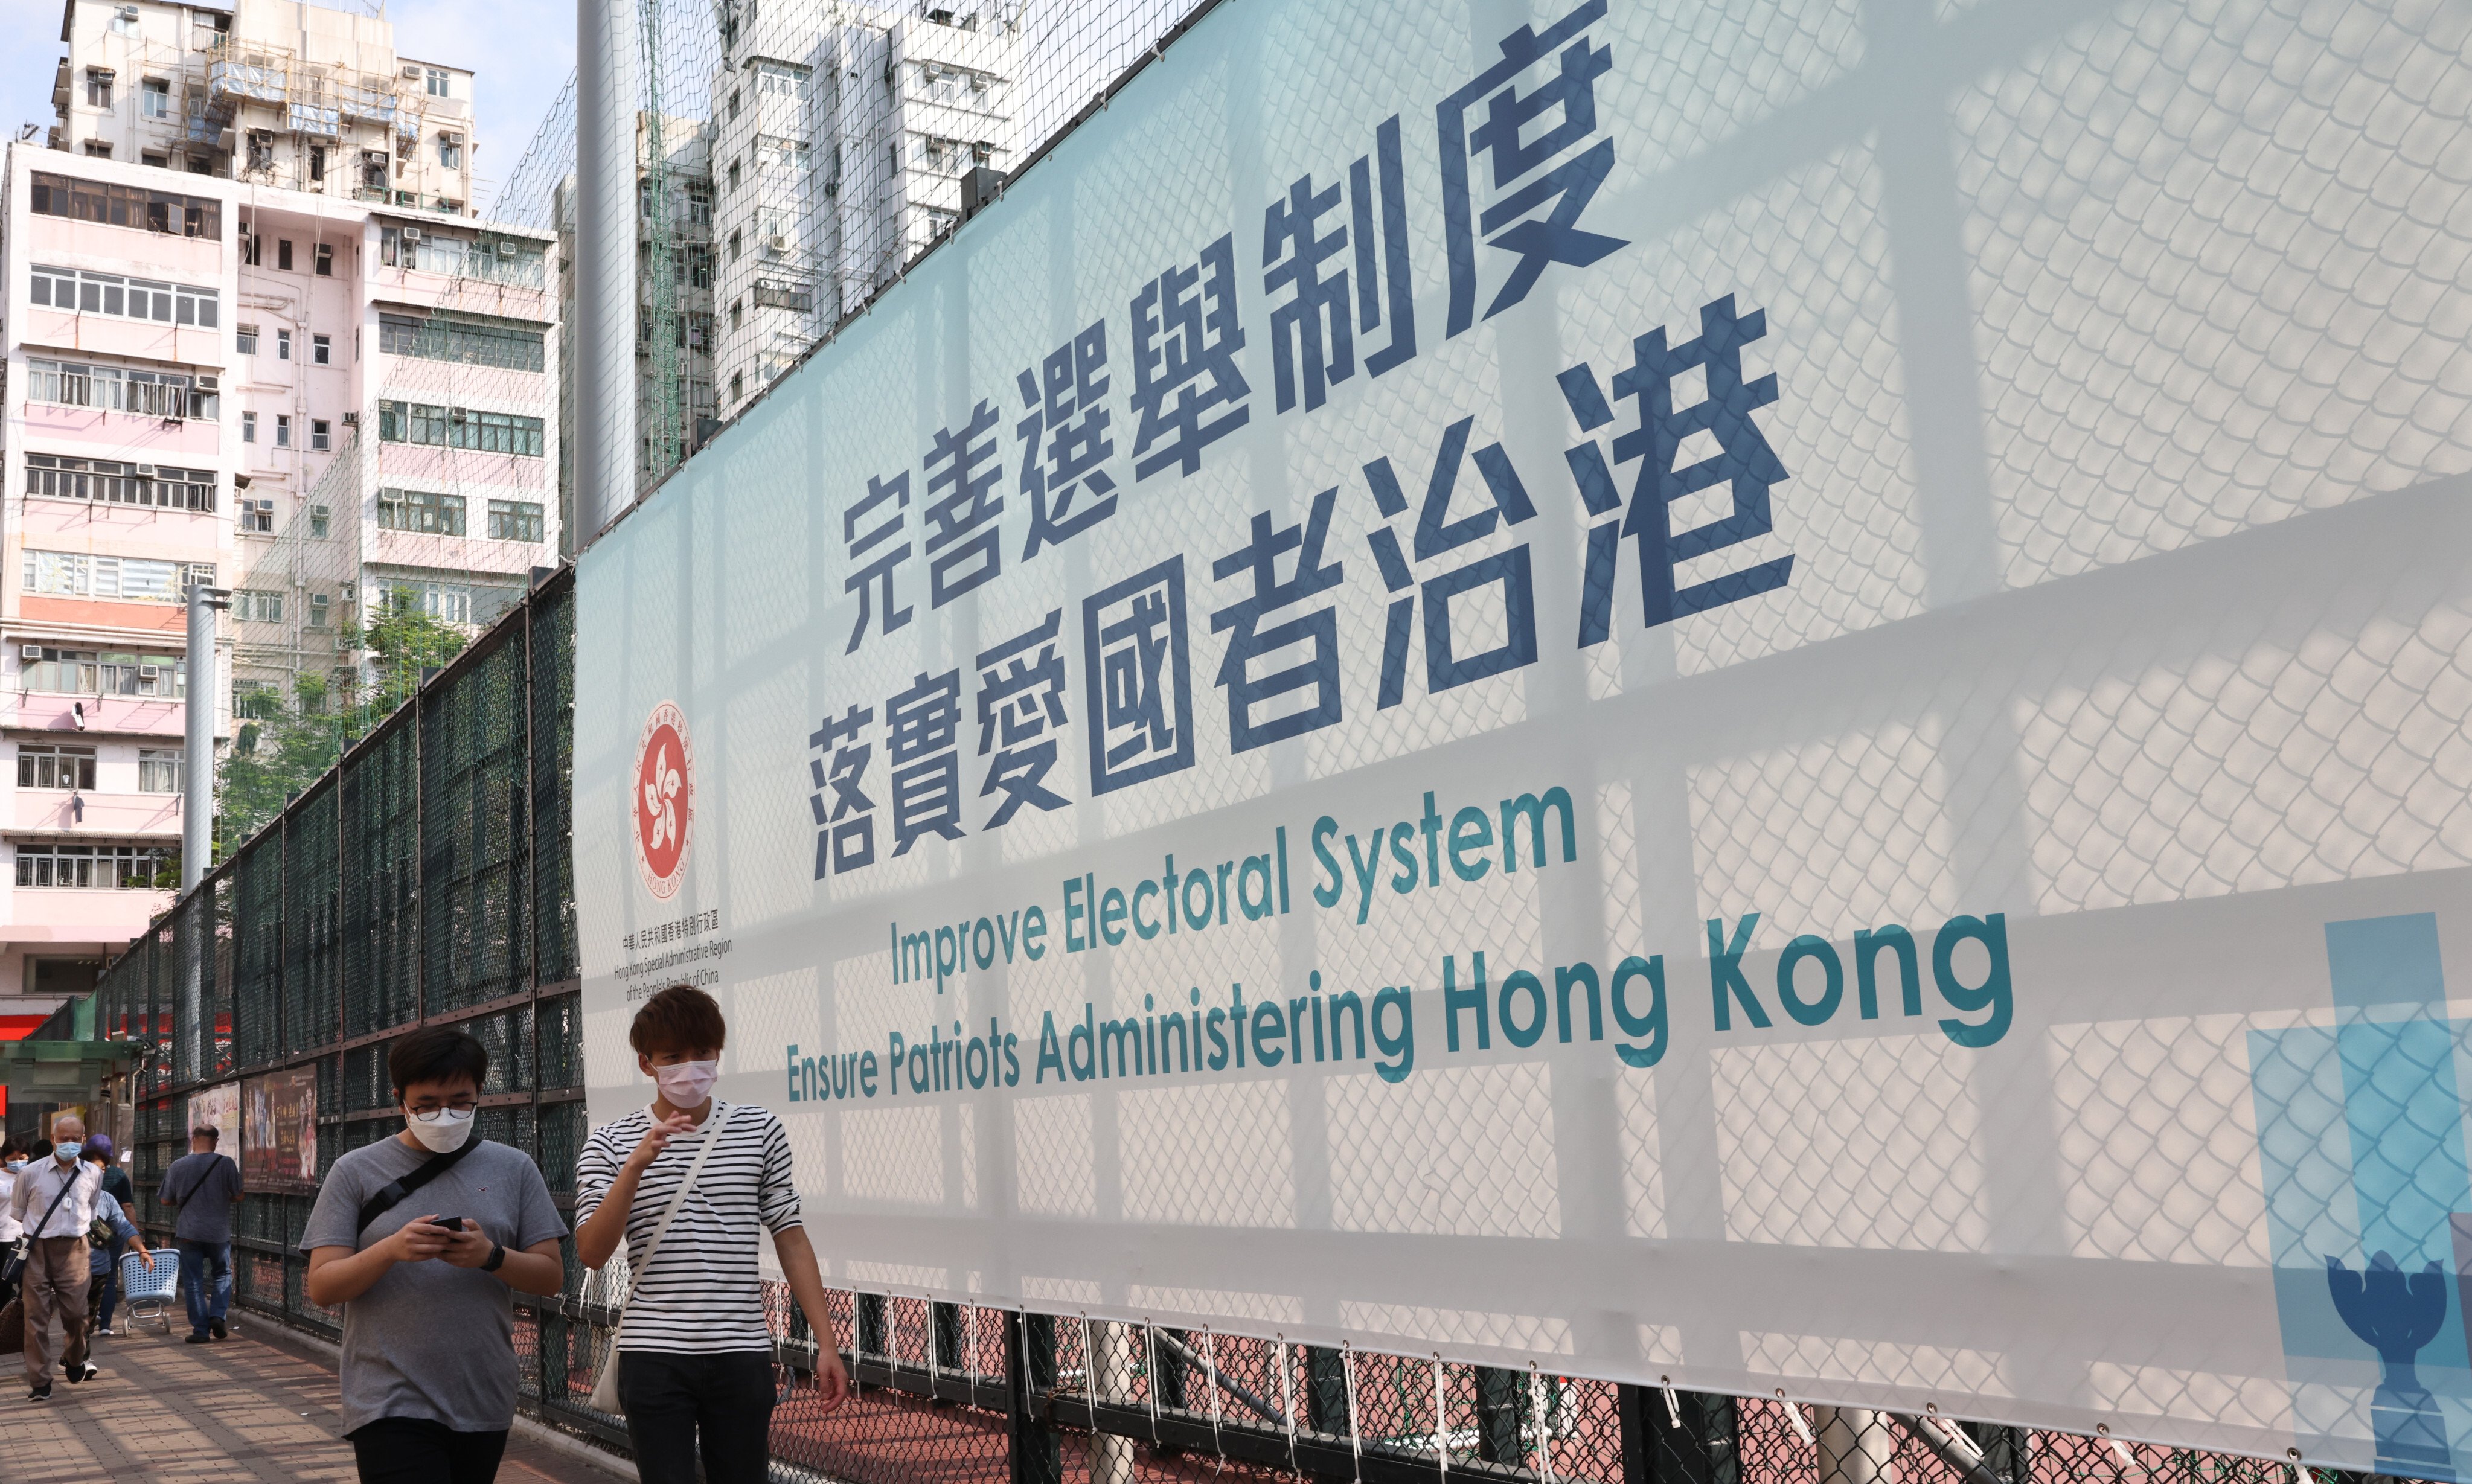 A banner outside Maple Street Playground at Sham Shui Po promoting the electoral reform announced by Beijing on March 30. Photo: K.Y. Cheng